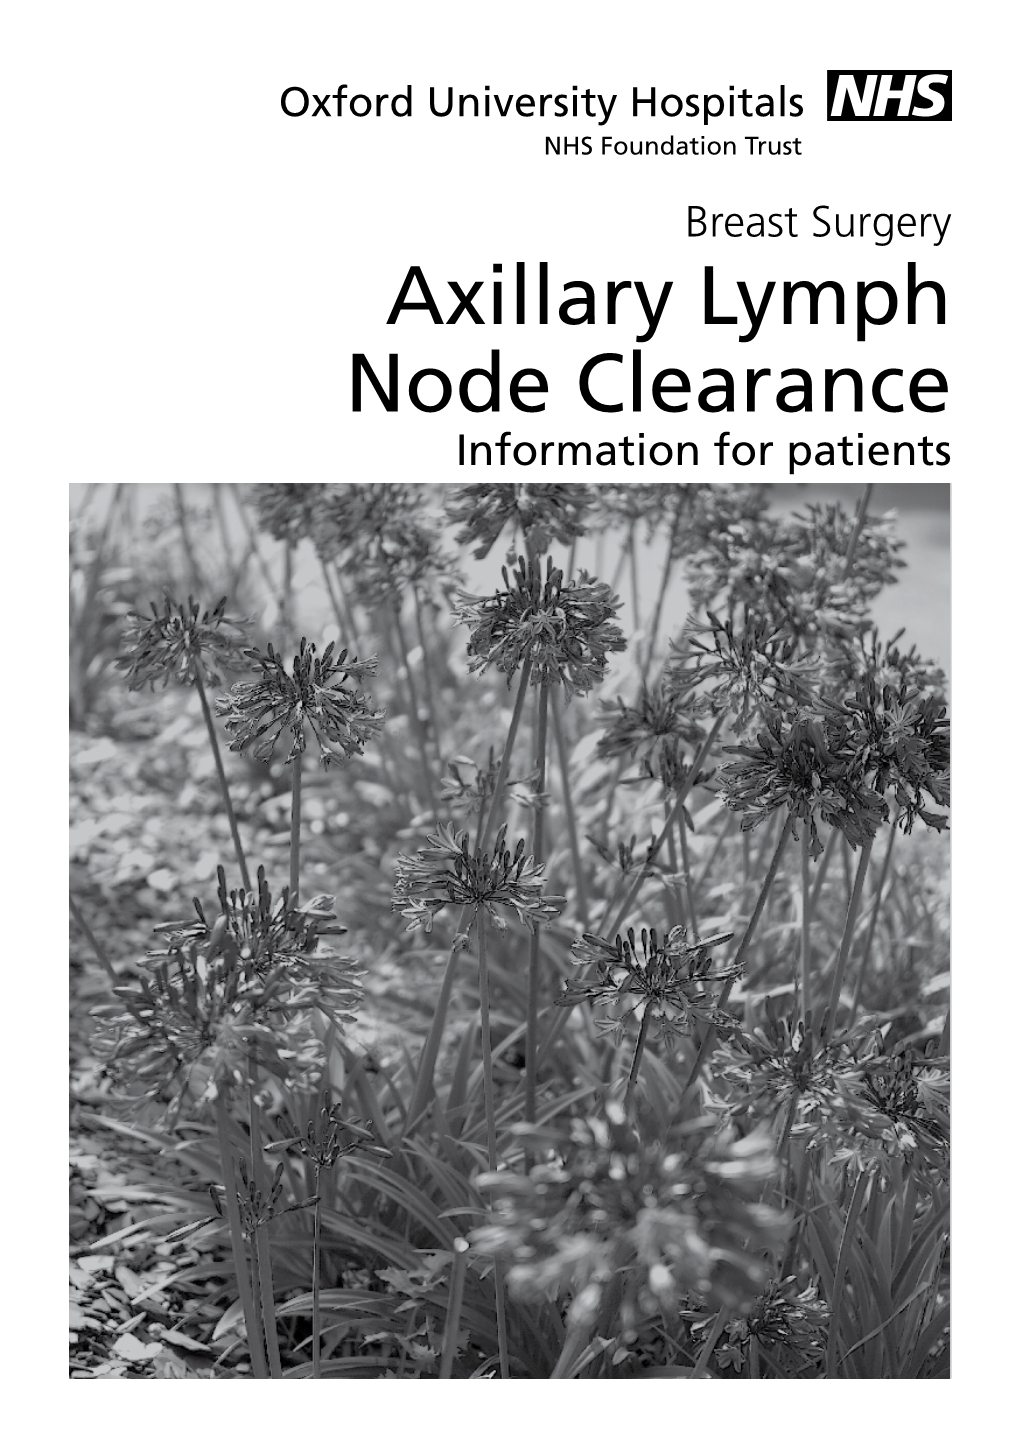 Axillary Lymph Node Clearance Information for Patients Page 2 You Have Been Recommended to Have an Axillary Lymph Node Clearance